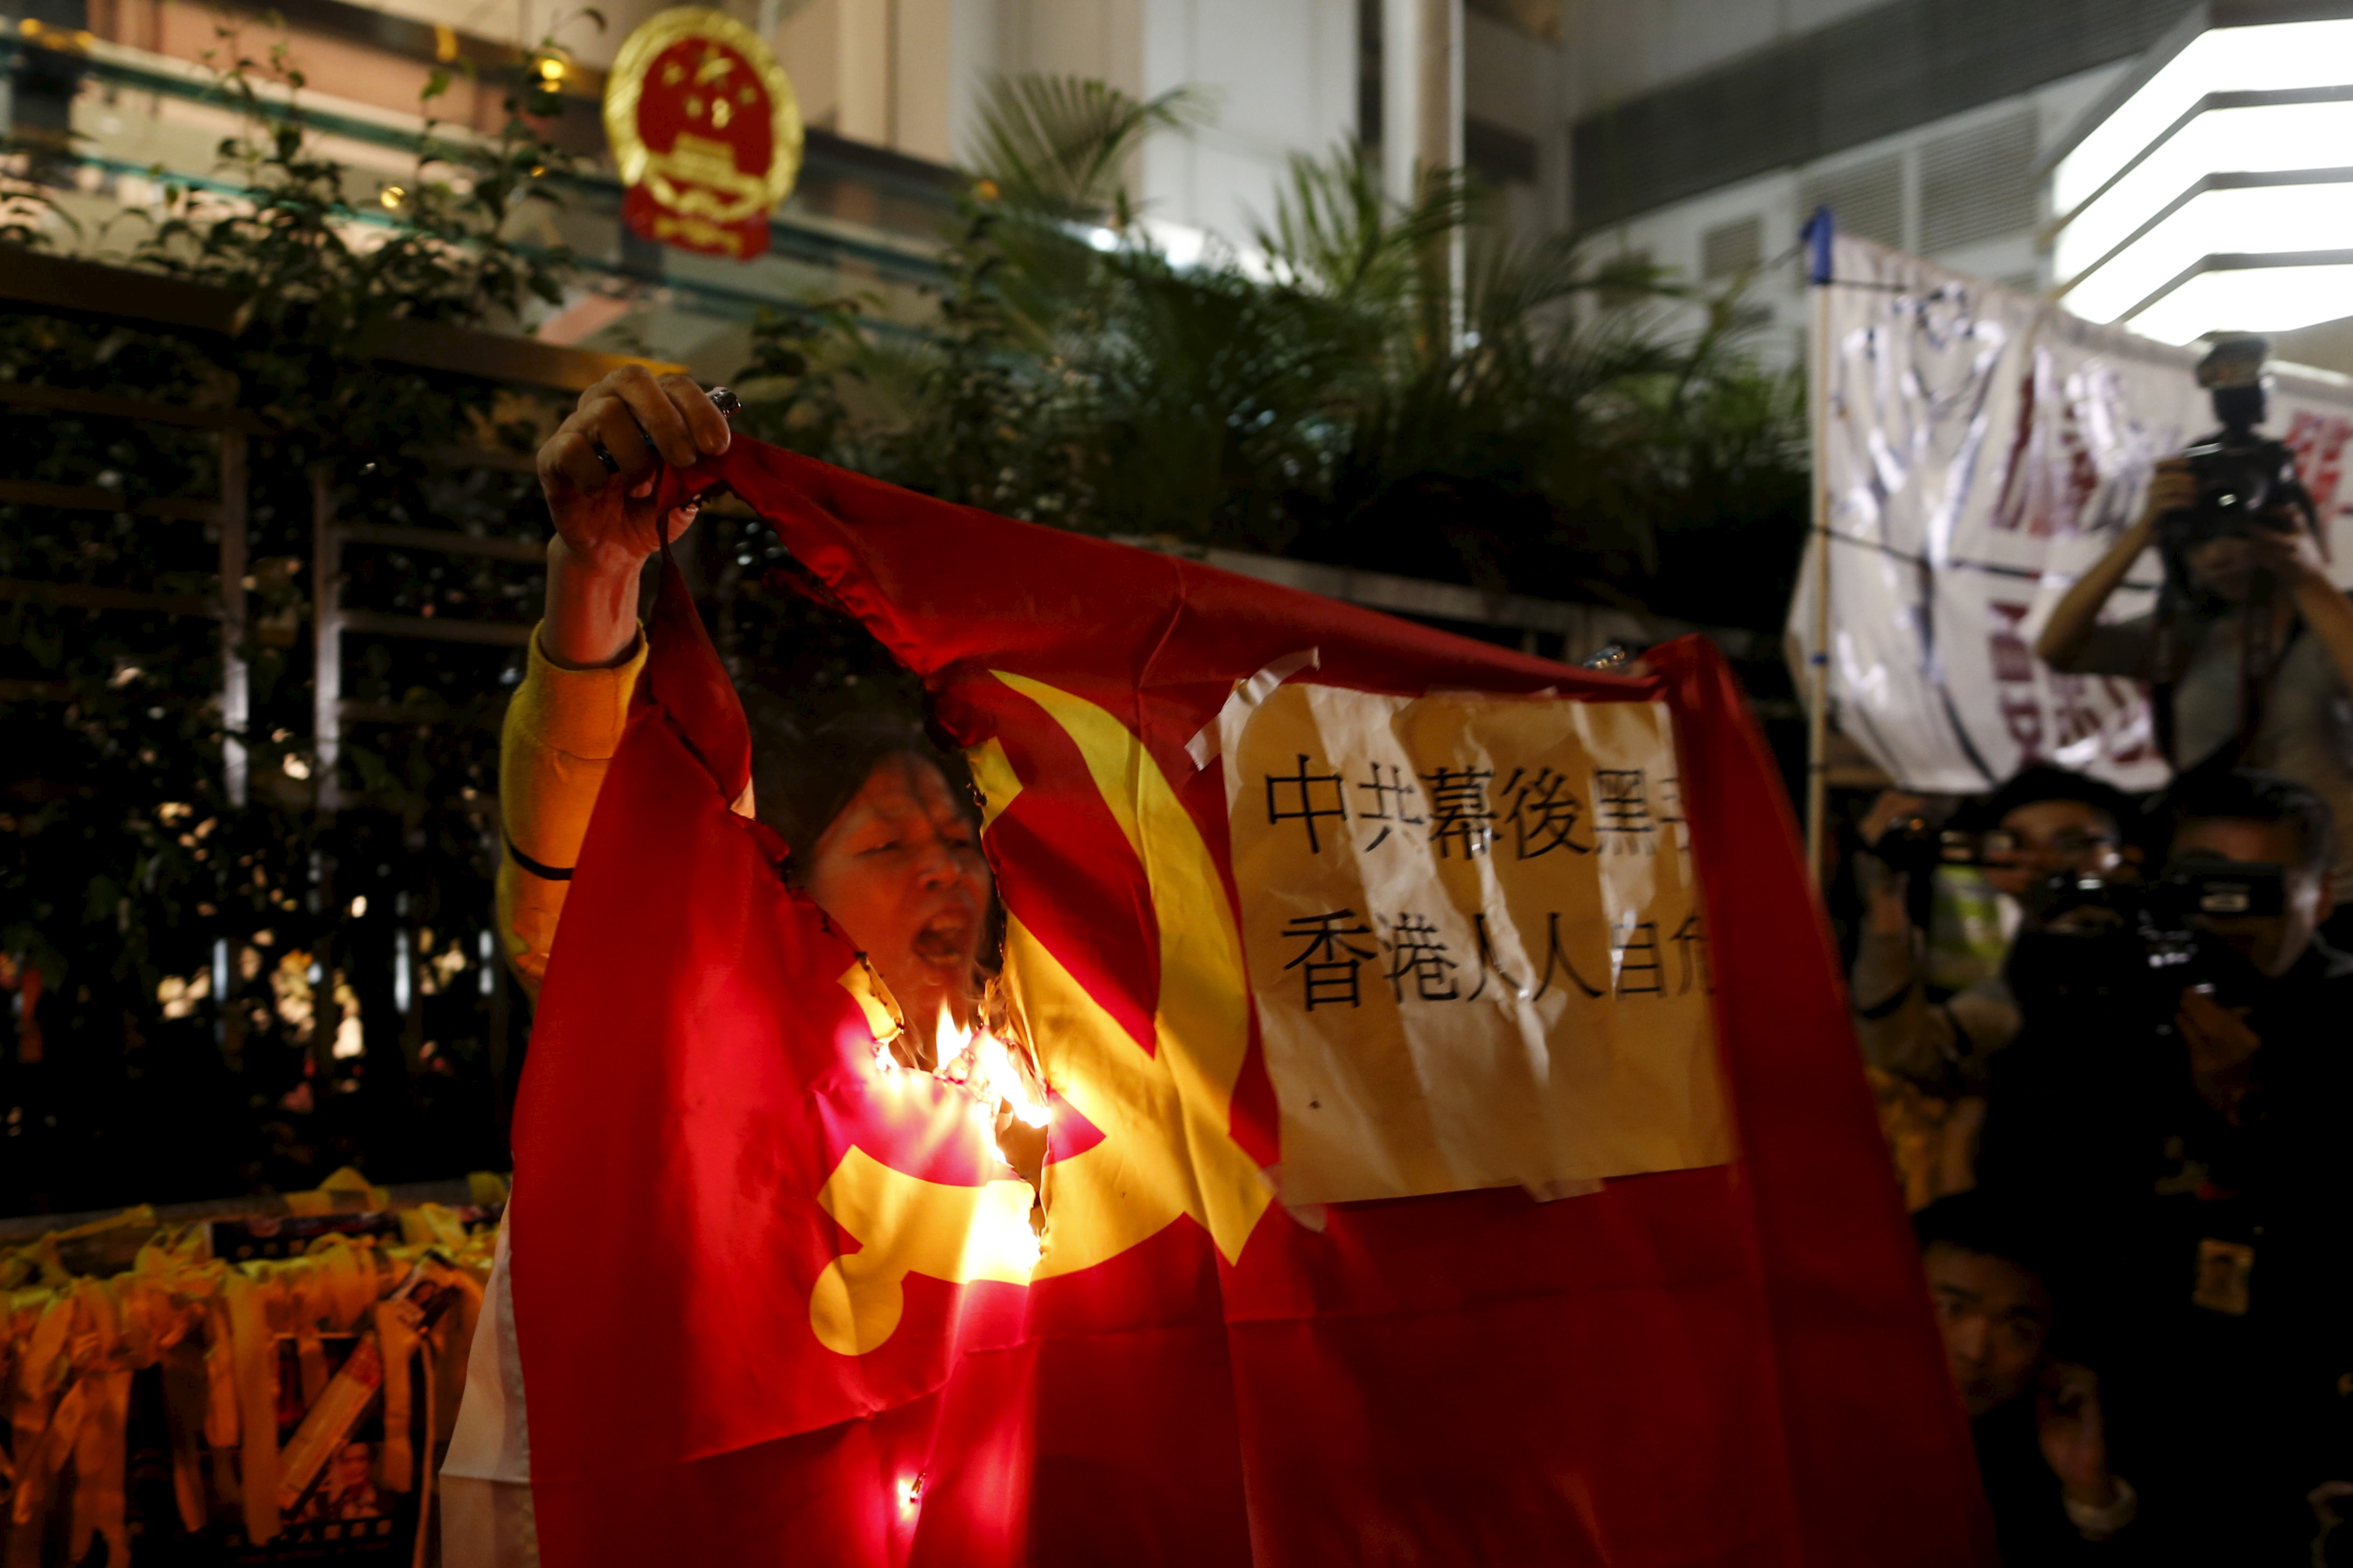 A demonstrator burns a flag of the Chinese Communist Party during a protest over the disappearance of booksellers, outside the Chinese Liaison Office in Hong Kong on Jan. 10, 2016 (Tyrone Siu—Reuters)